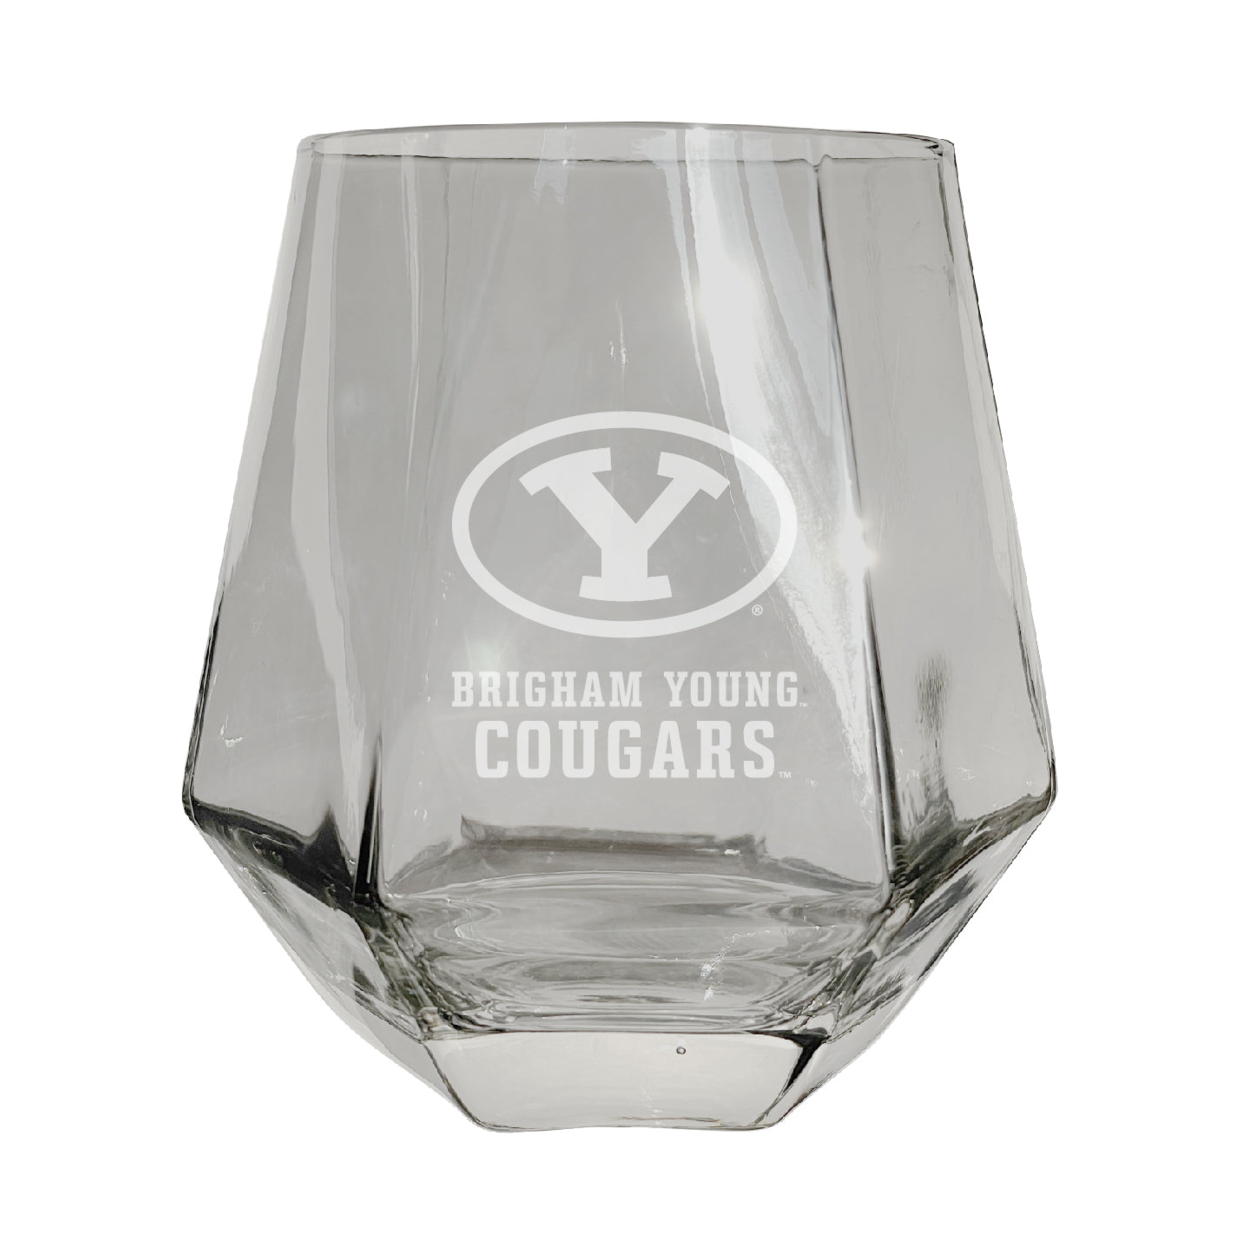 Brigham Young Cougars Etched Diamond Cut Stemless 10 Ounce Wine Glass Clear